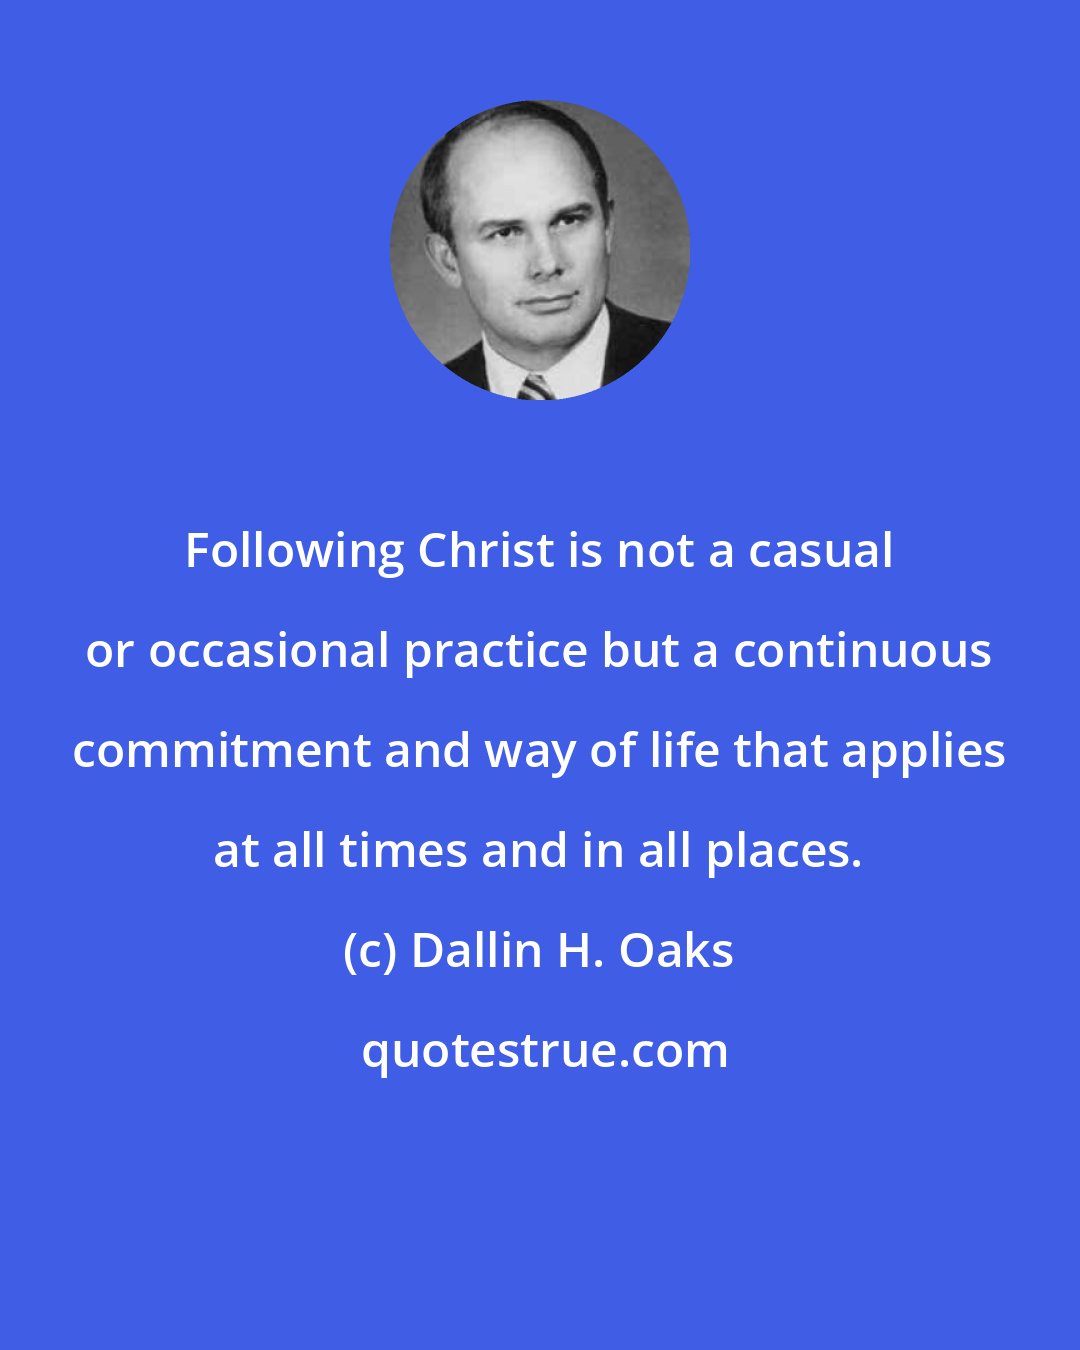 Dallin H. Oaks: Following Christ is not a casual or occasional practice but a continuous commitment and way of life that applies at all times and in all places.